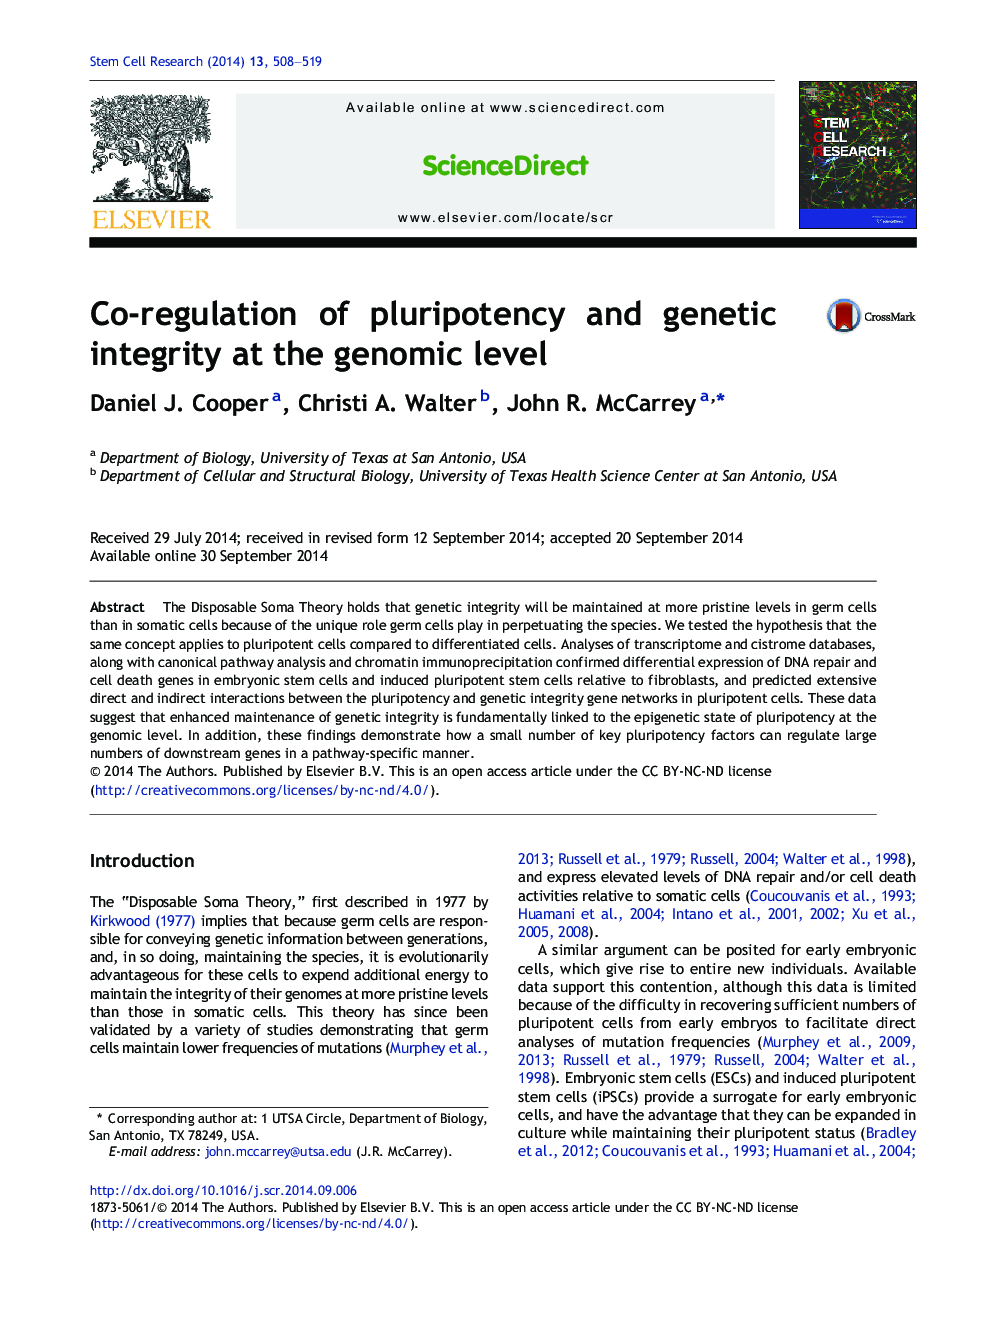 Co-regulation of pluripotency and genetic integrity at the genomic level